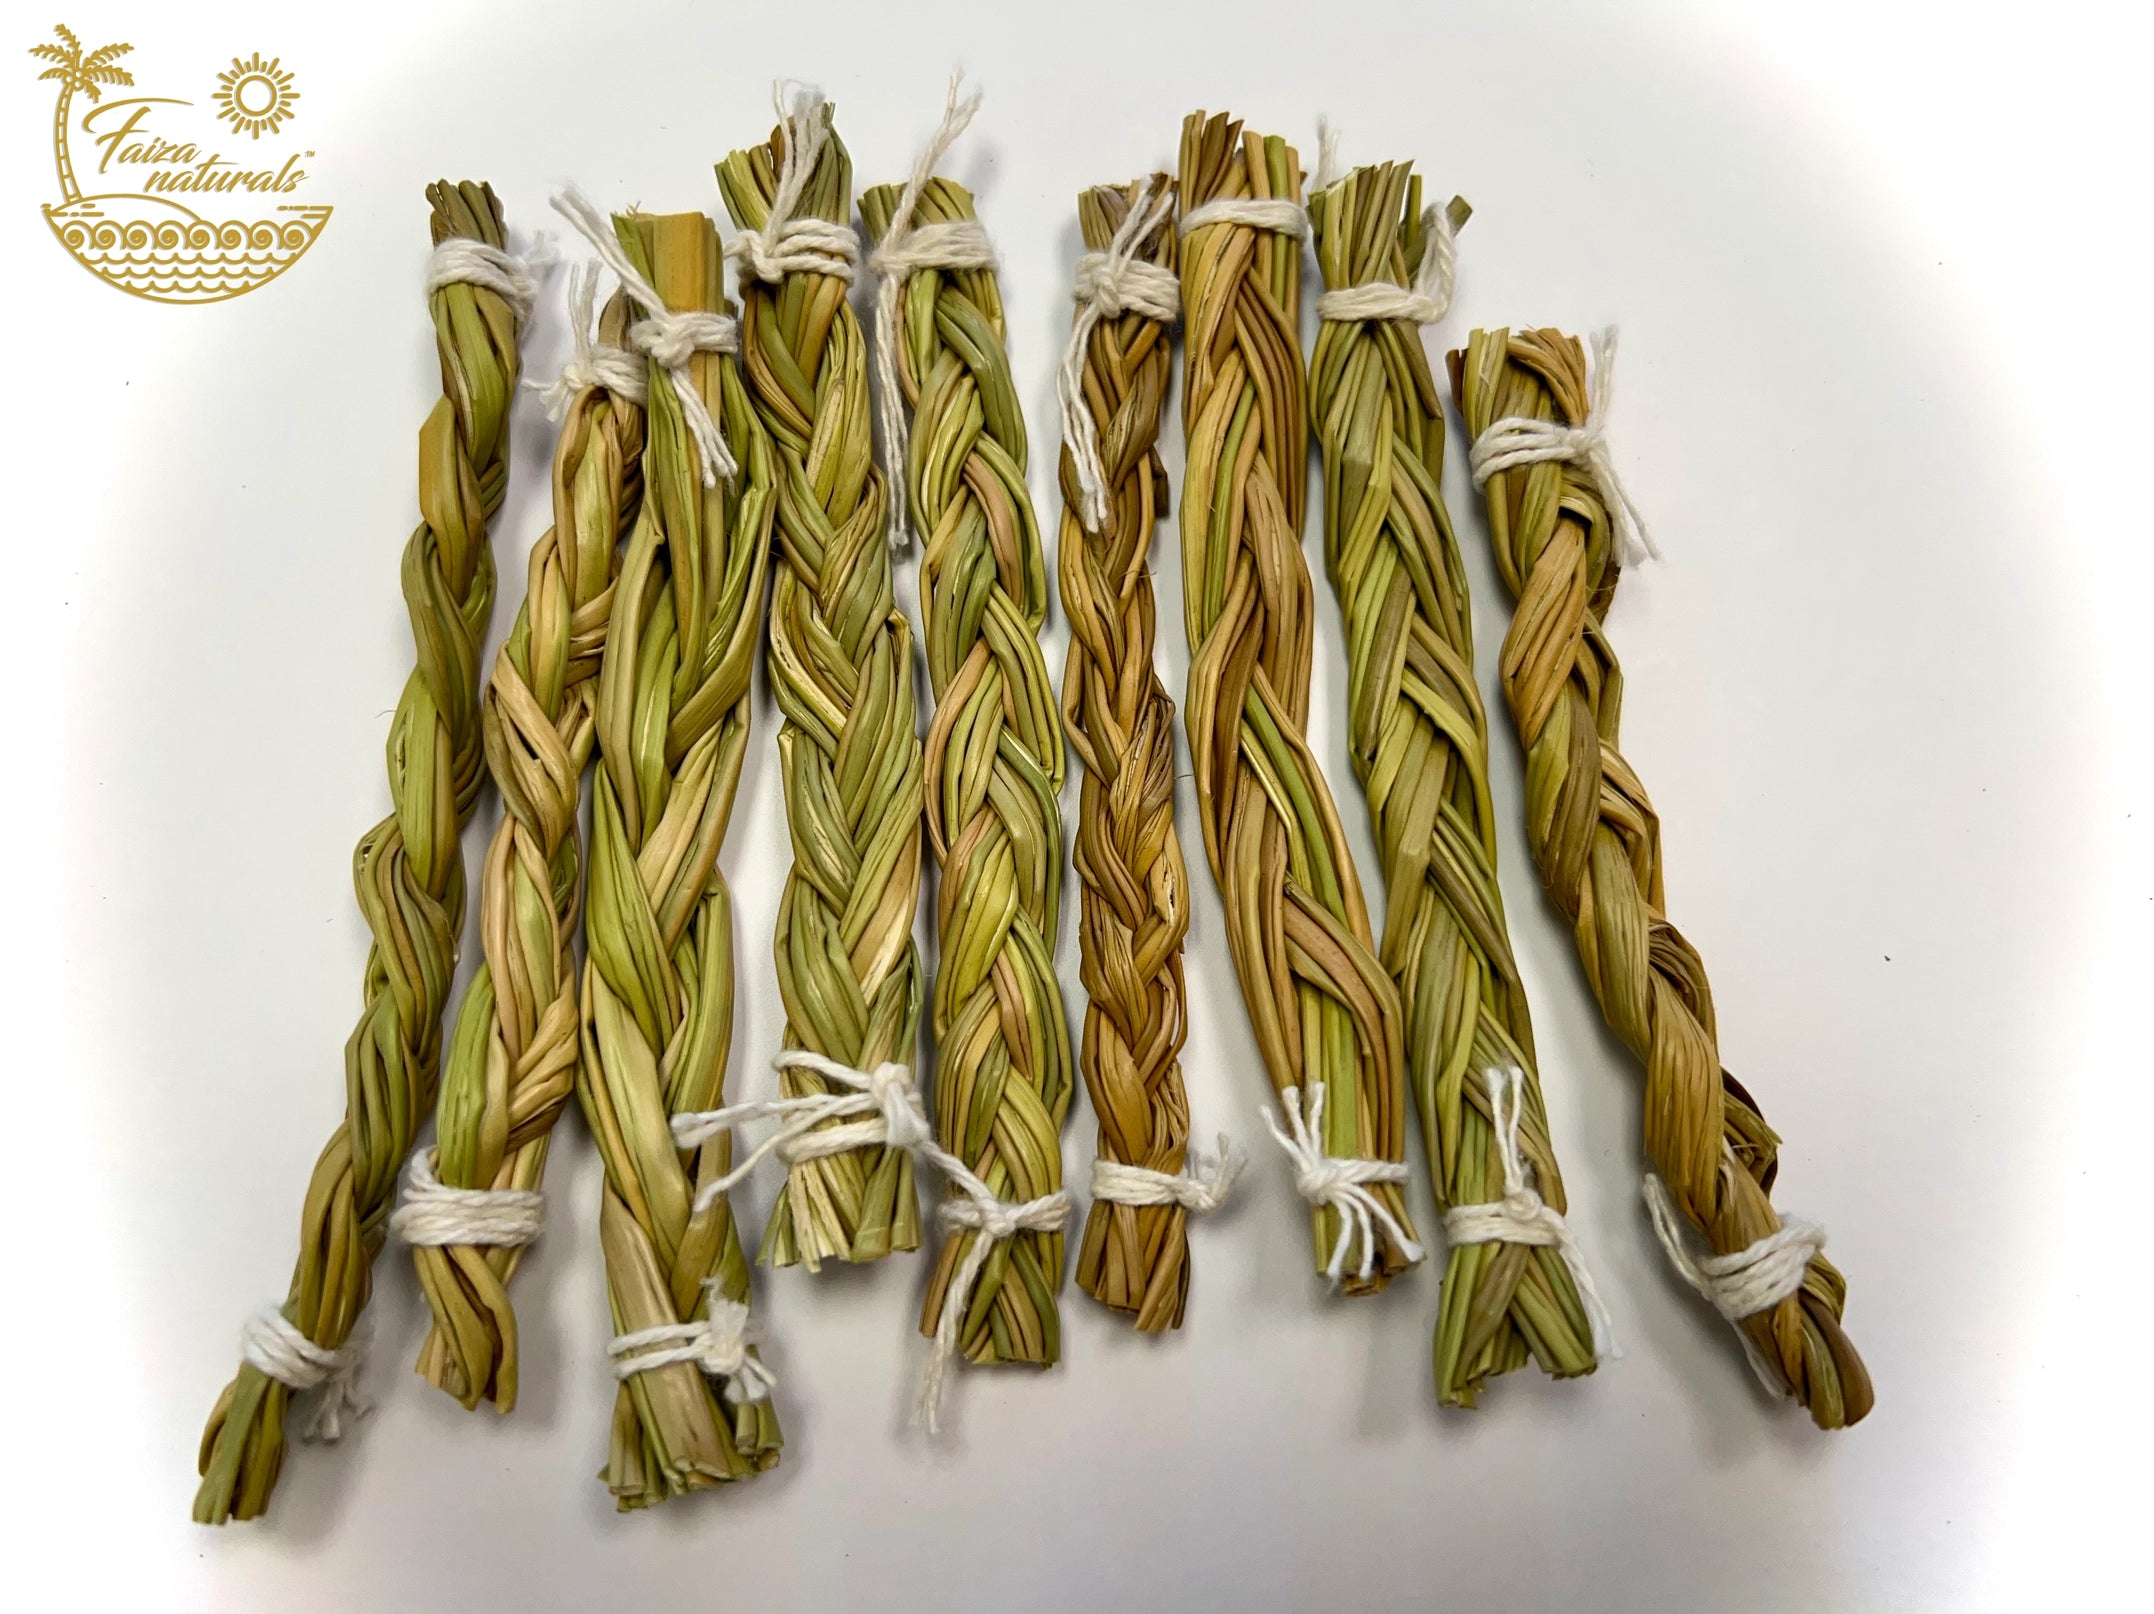 Where to Buy Braided Sweetgrass for Smudging